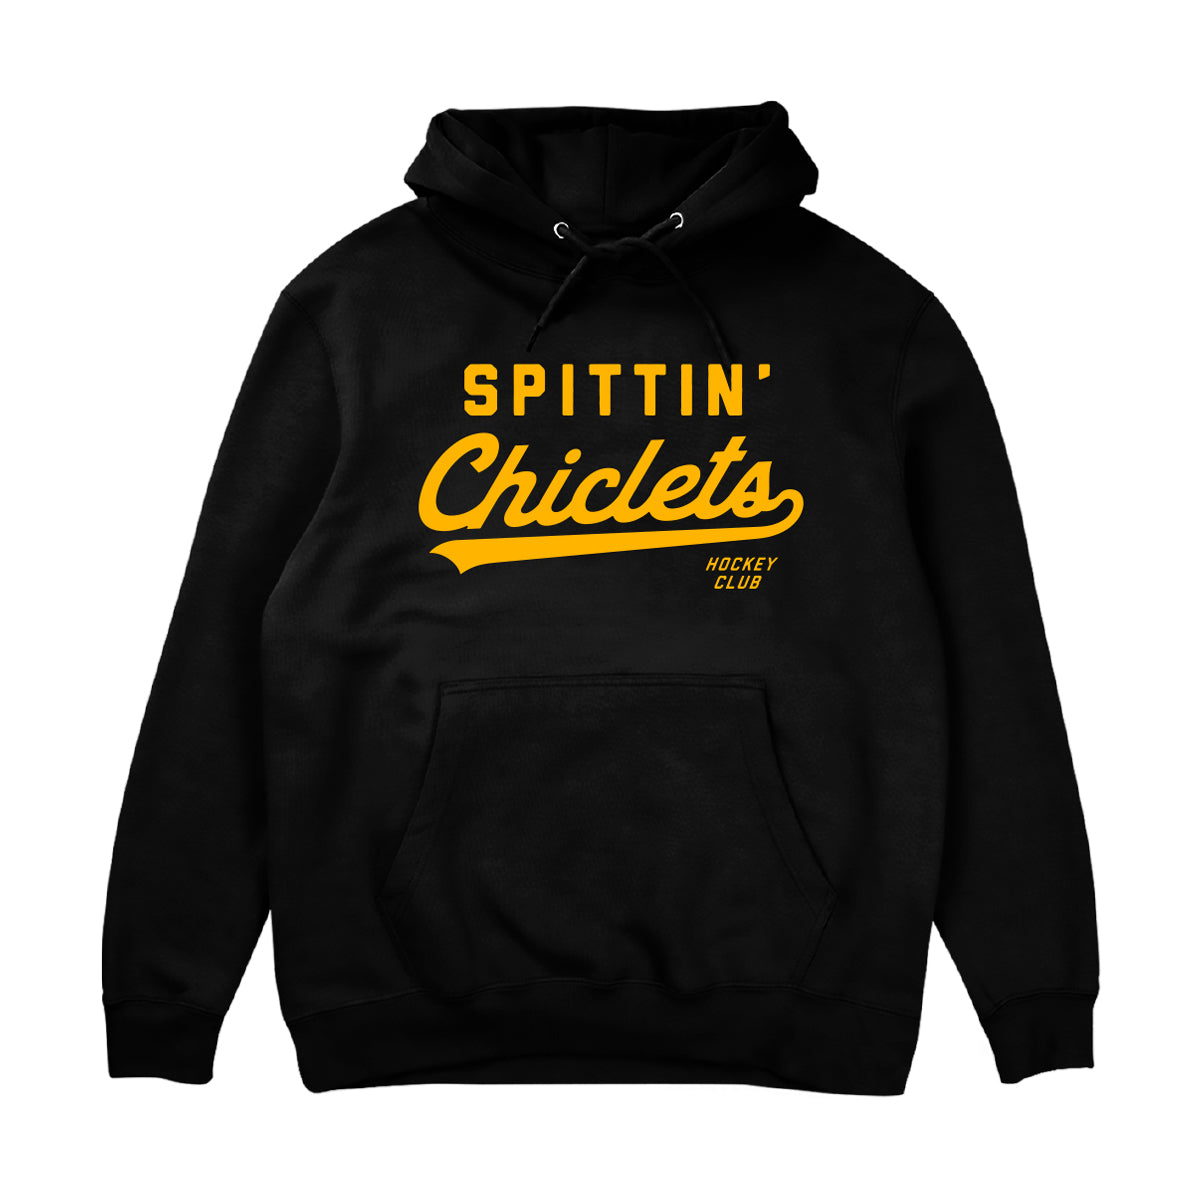 Spittin Chiclets Tailwhip Graphic Hoodie